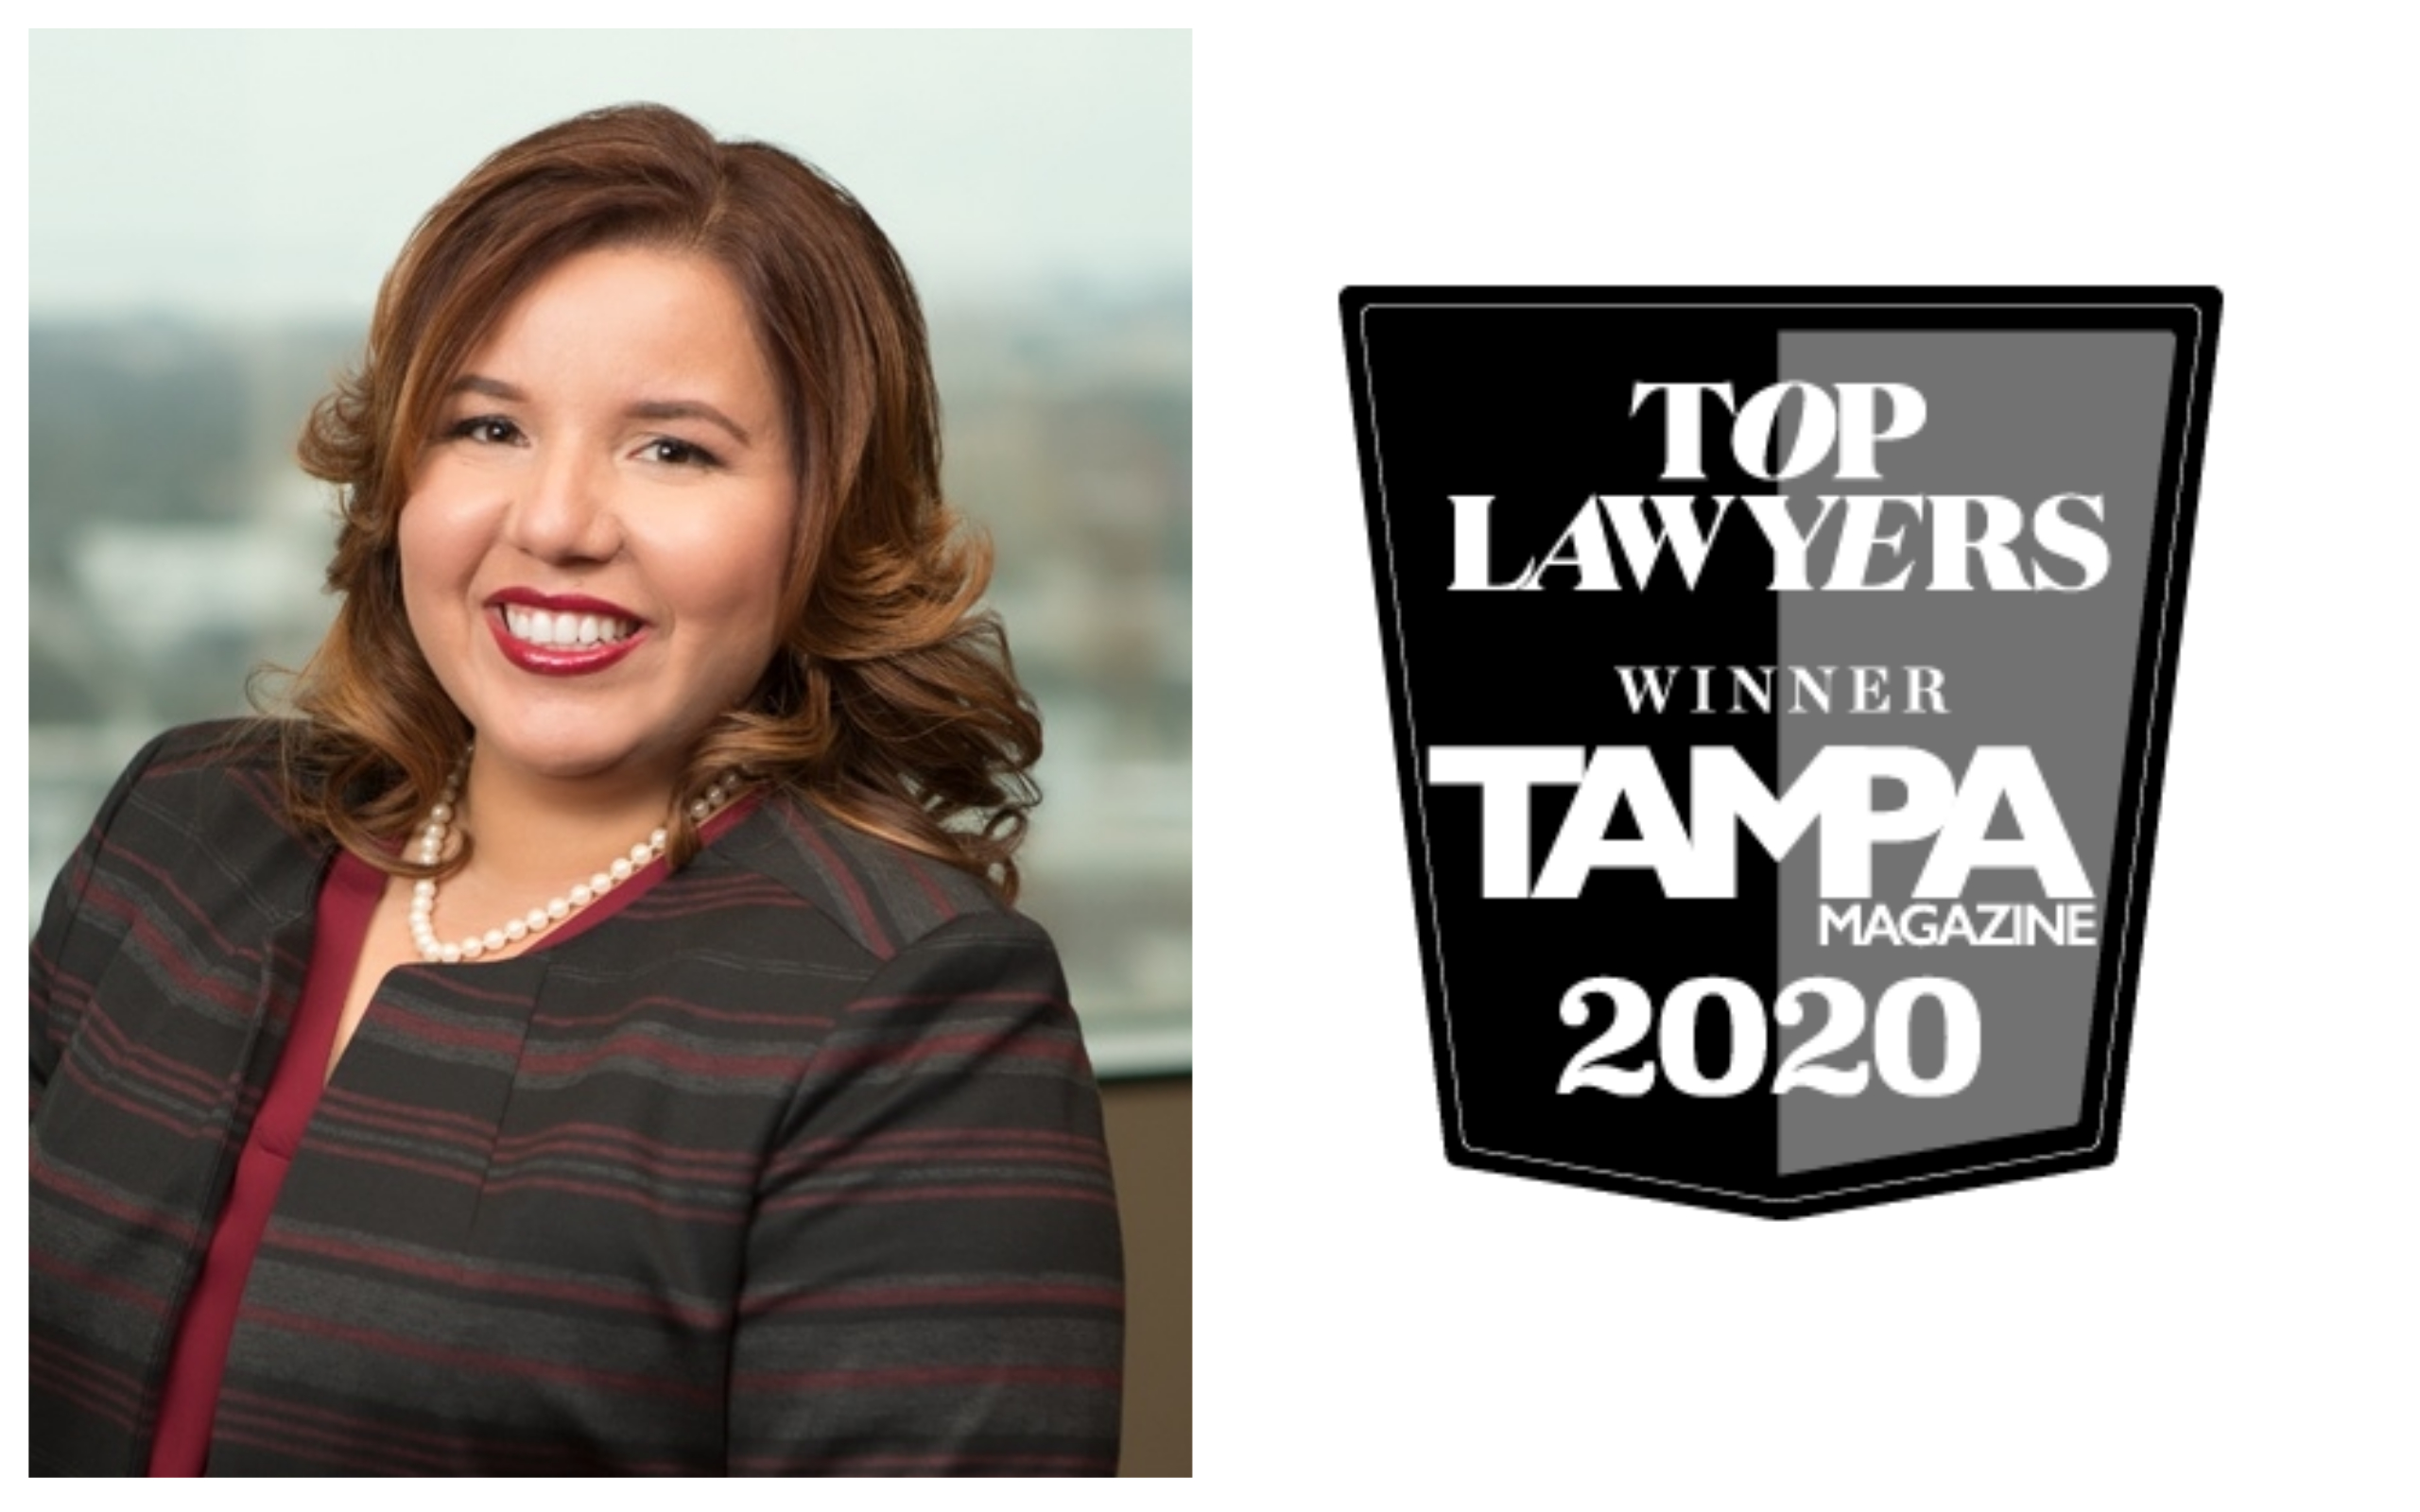 Maria del Carmen Ramos Named to Tampa Magazines’ 2020 Top Lawyers List